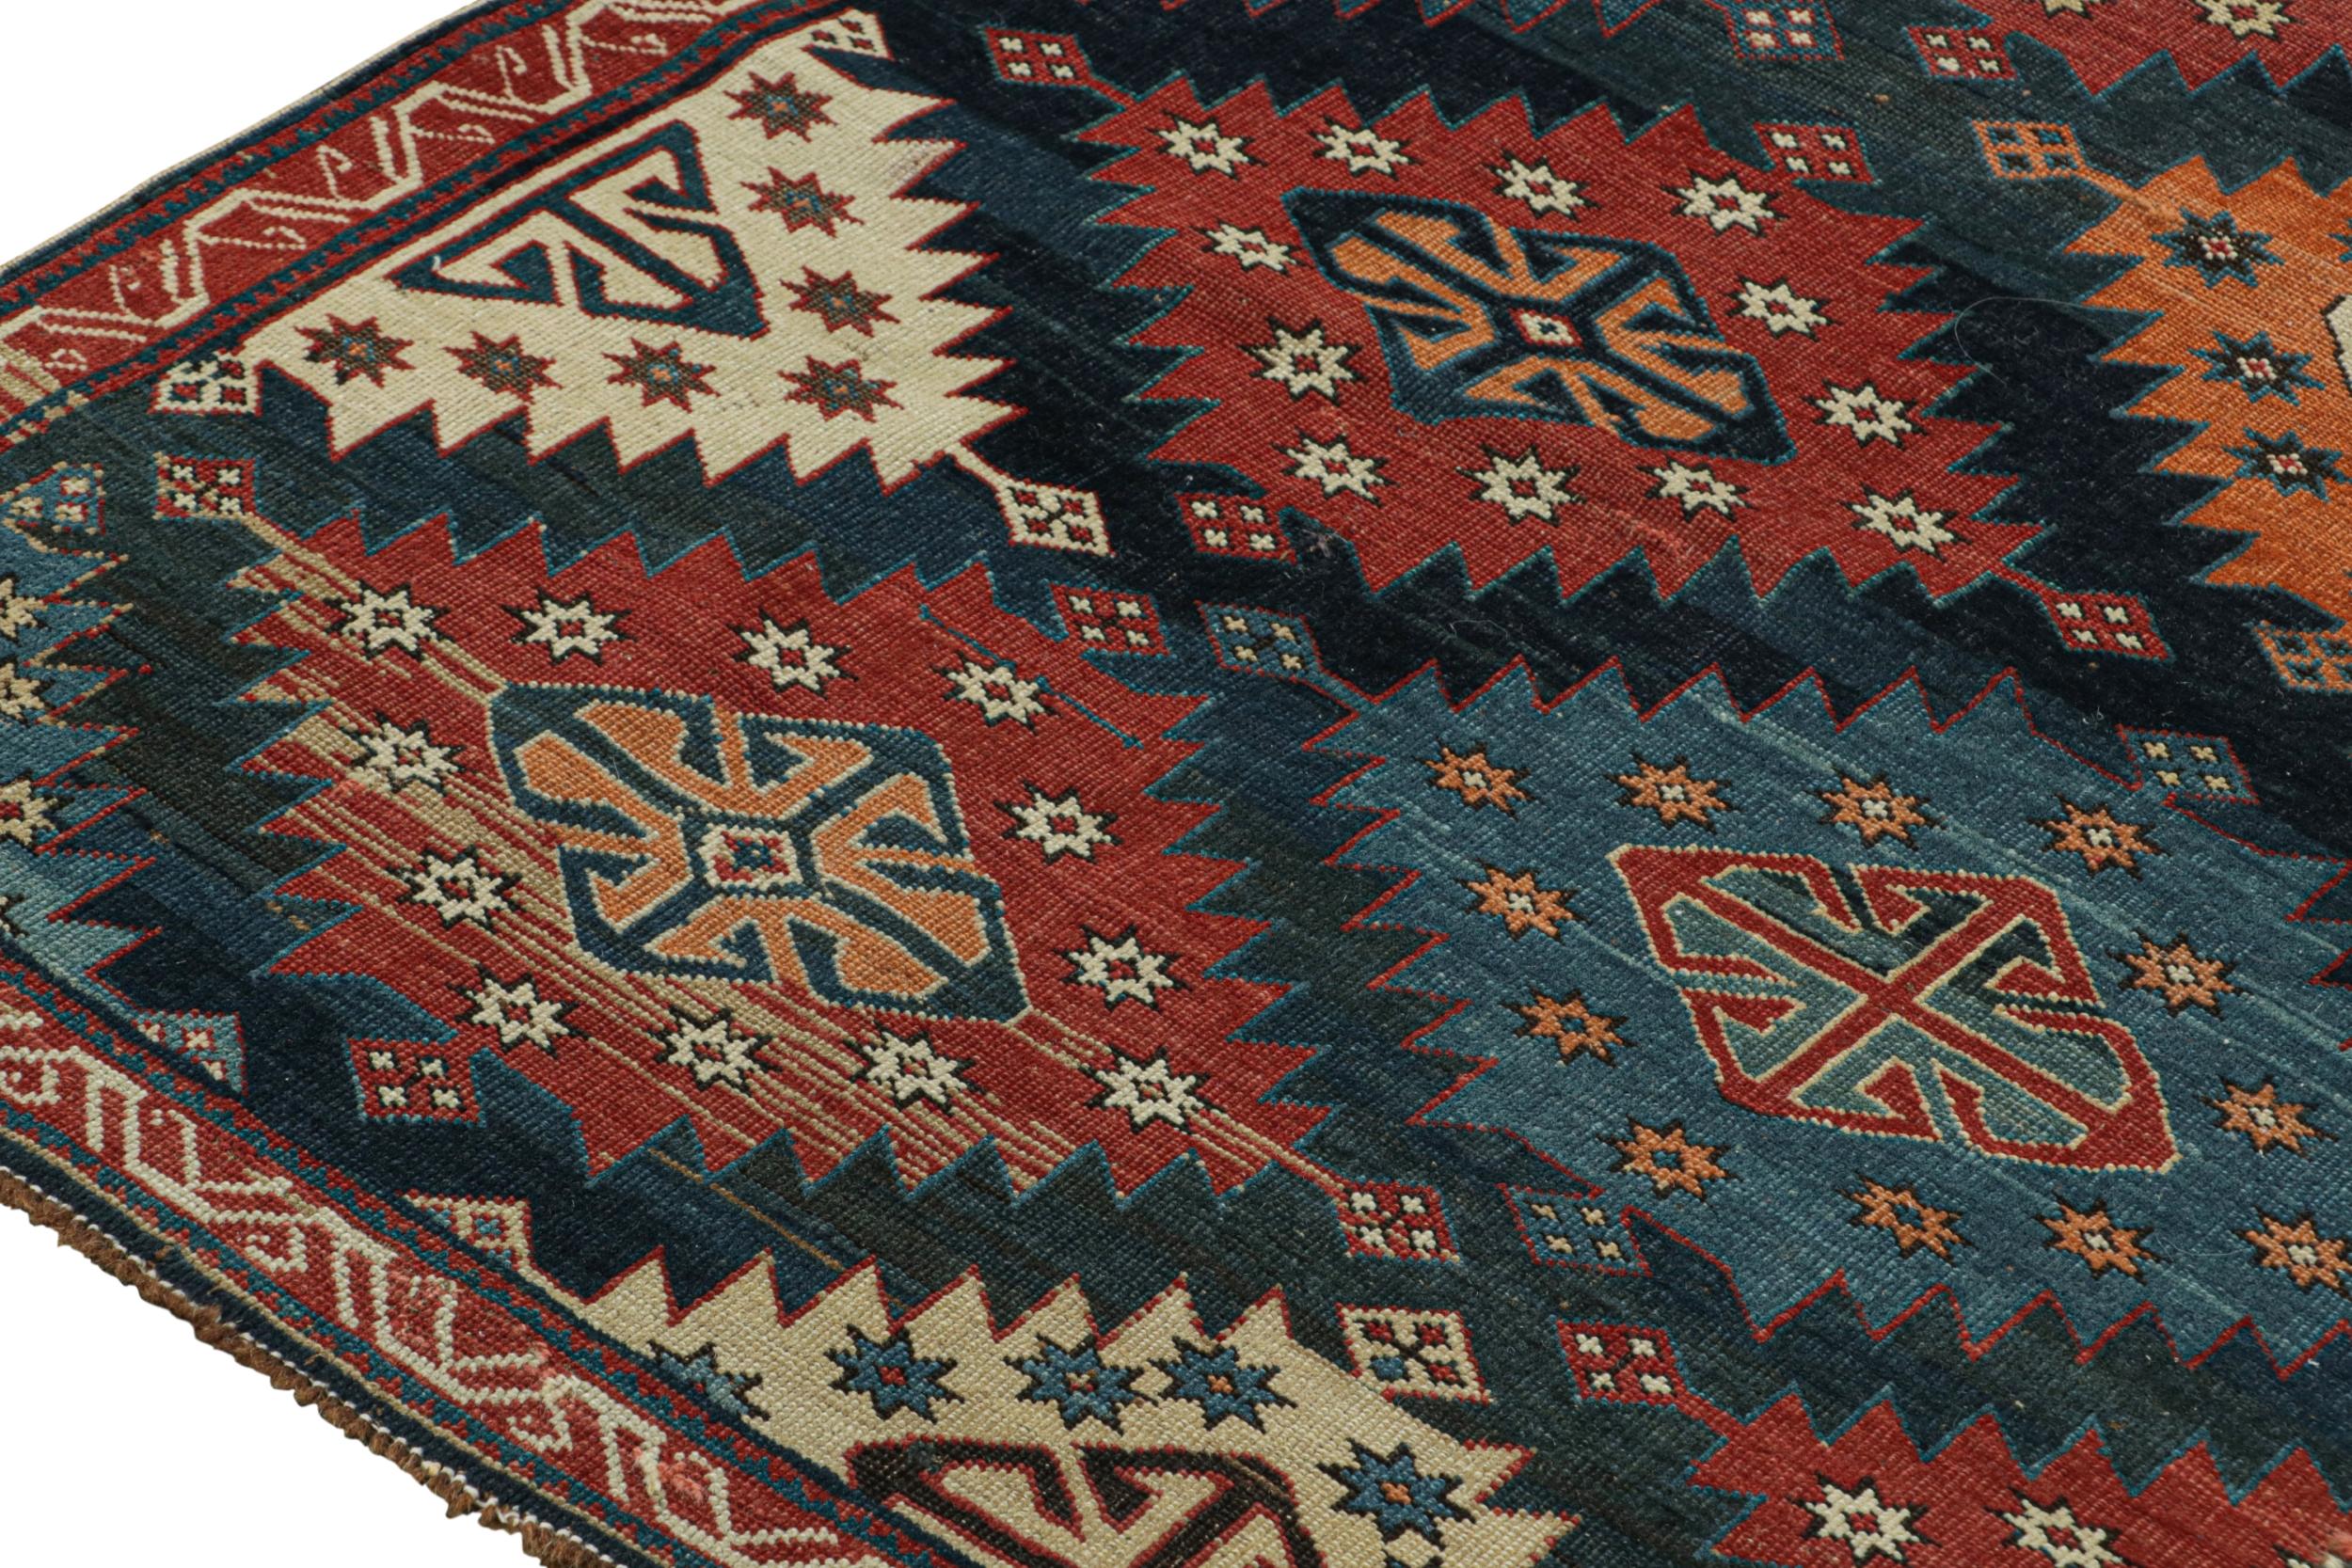 Early 20th Century Antique Caucasian Kazak Rug in Red & Blue Tribal Patterns from Rug & Kilim For Sale